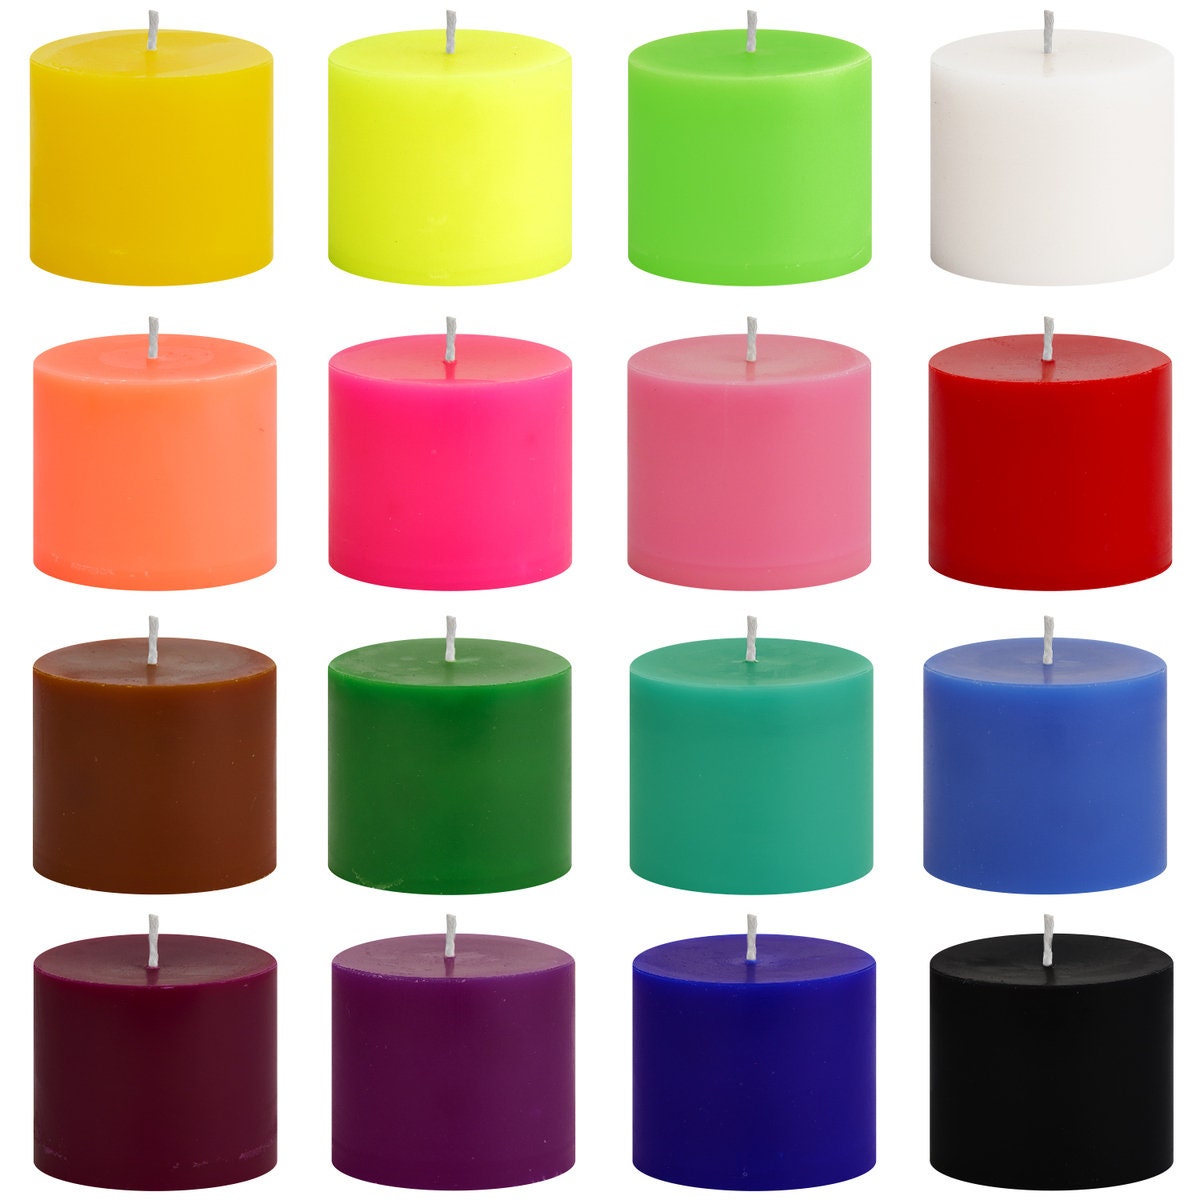 Candle Wax Dye Color Chips Soy Candles Making Kit Coloring Pack Supplies 16 Set